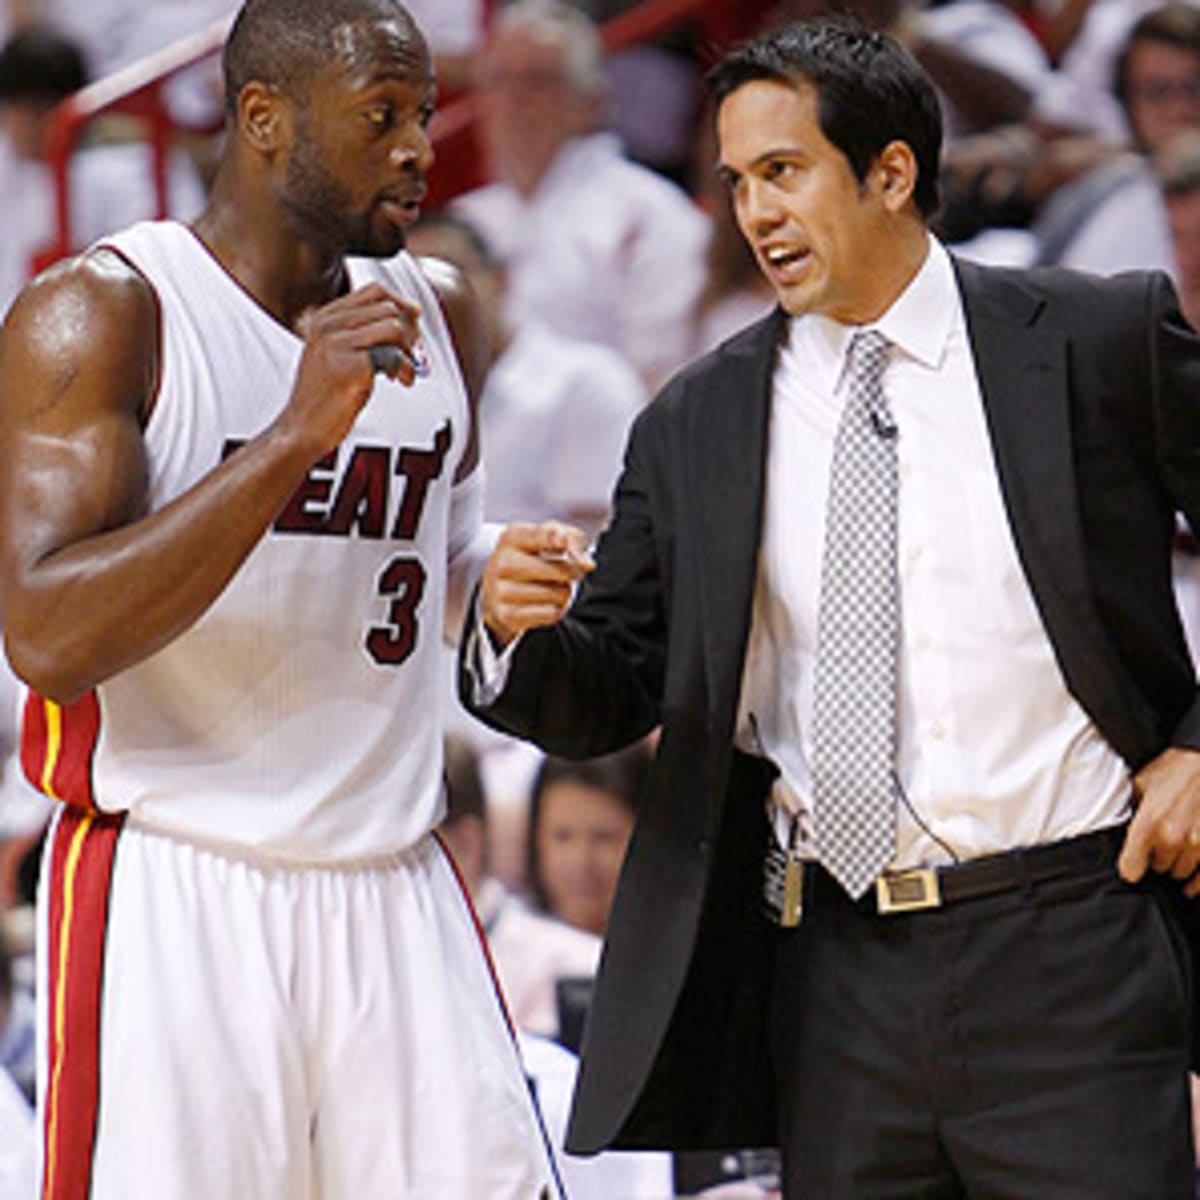 Dwyane Wade's duties with Heat now include role as an 'assistant coach